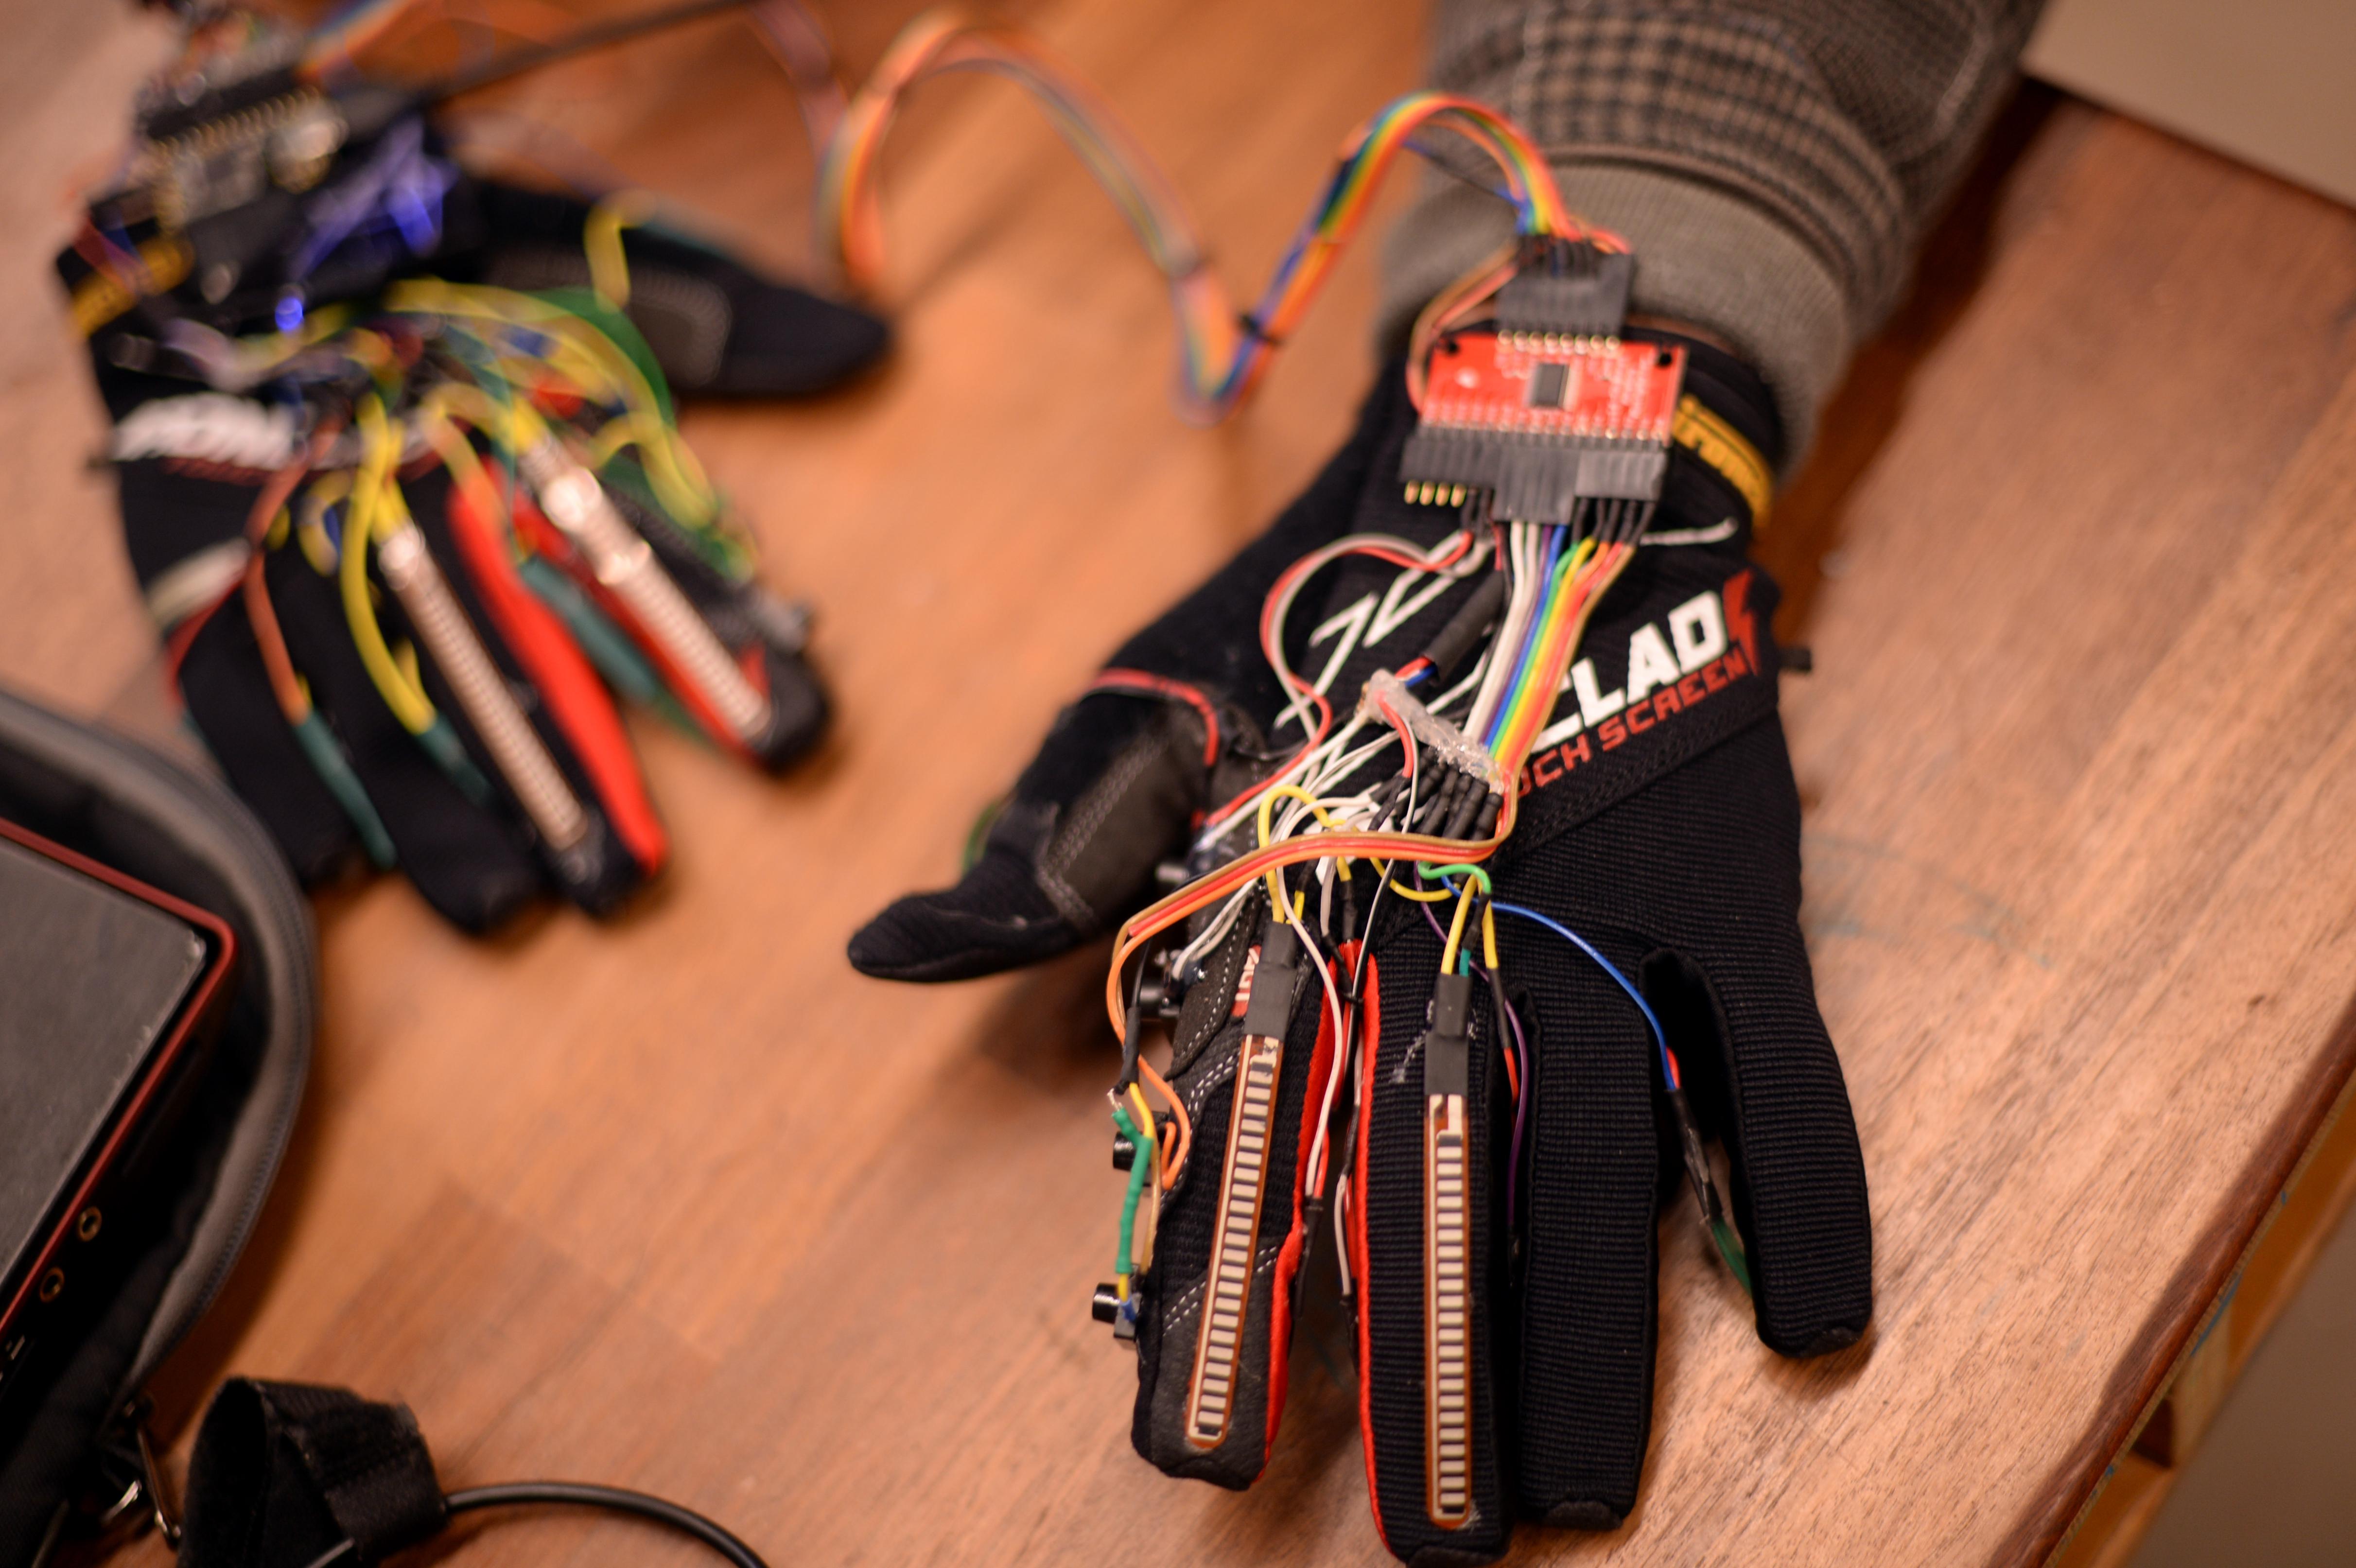 BOULDER, CO - MARCH 10: Technology, Arts and Media program student Kristof Klipfel created gloves that can turn any surface into a musical keyboard at University of Colorado Boulder March 10, 2017, in Boulder, Colorado. (Photo by Hyoung Chang/The Denver Post)